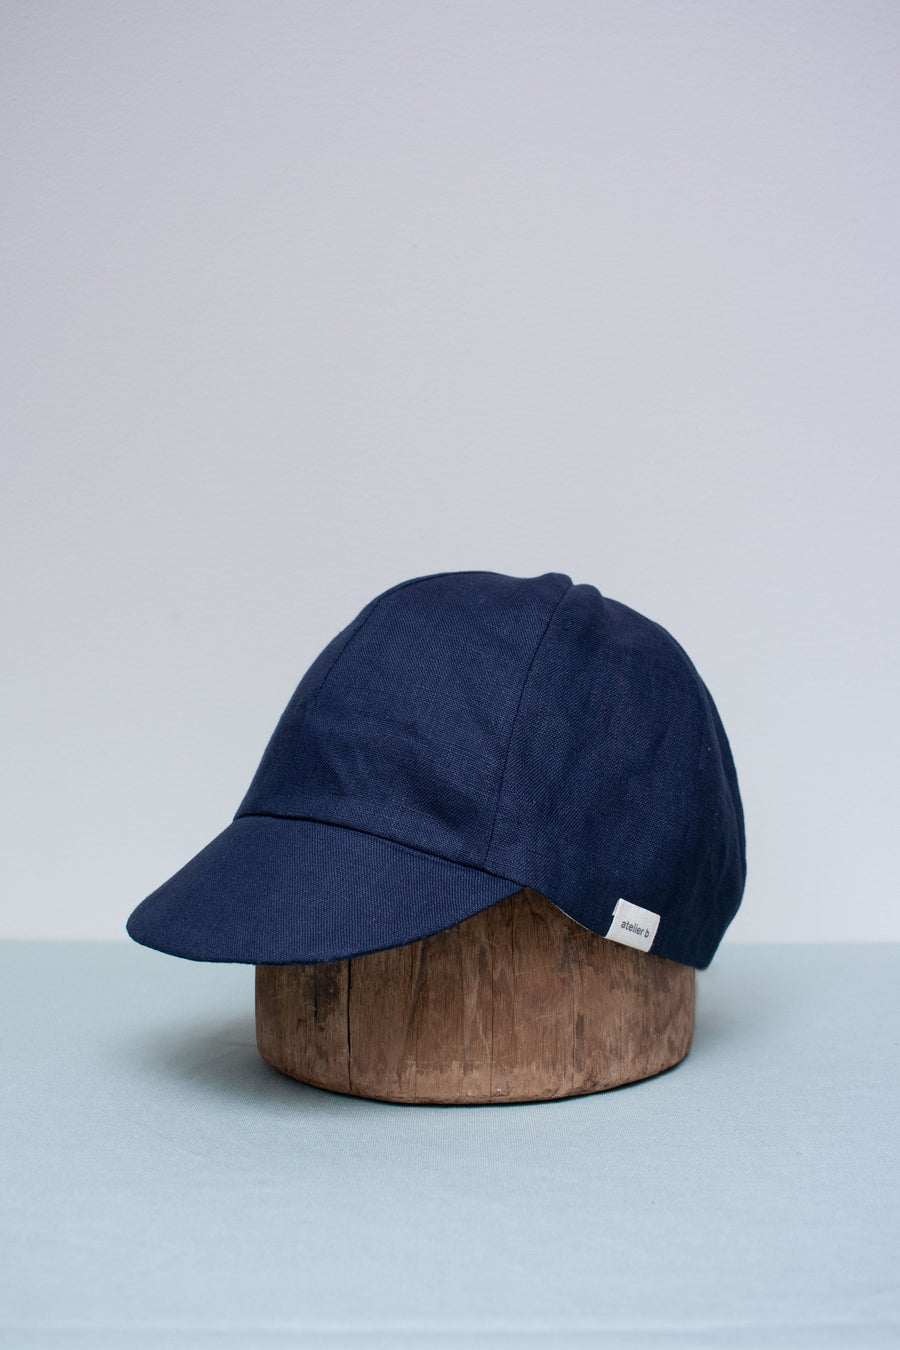 Unisex cap for young and old No6097u, natural linen